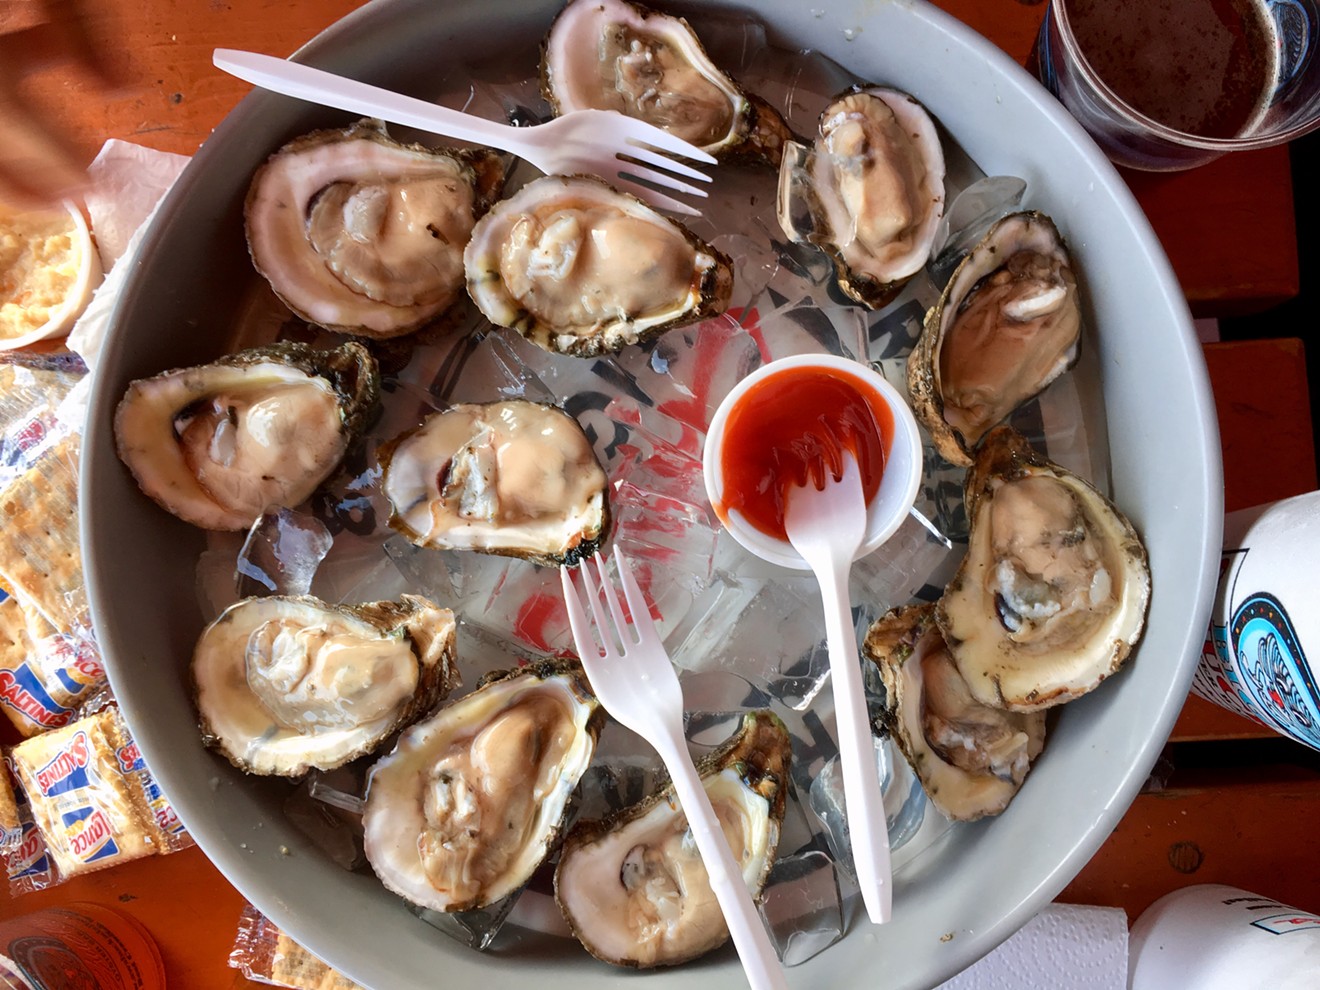 Aw Shucks has Gulf oysters for cheap ($14.99 for a dozen, half price during happy hour), and there's plenty of Saltines around for the picking.